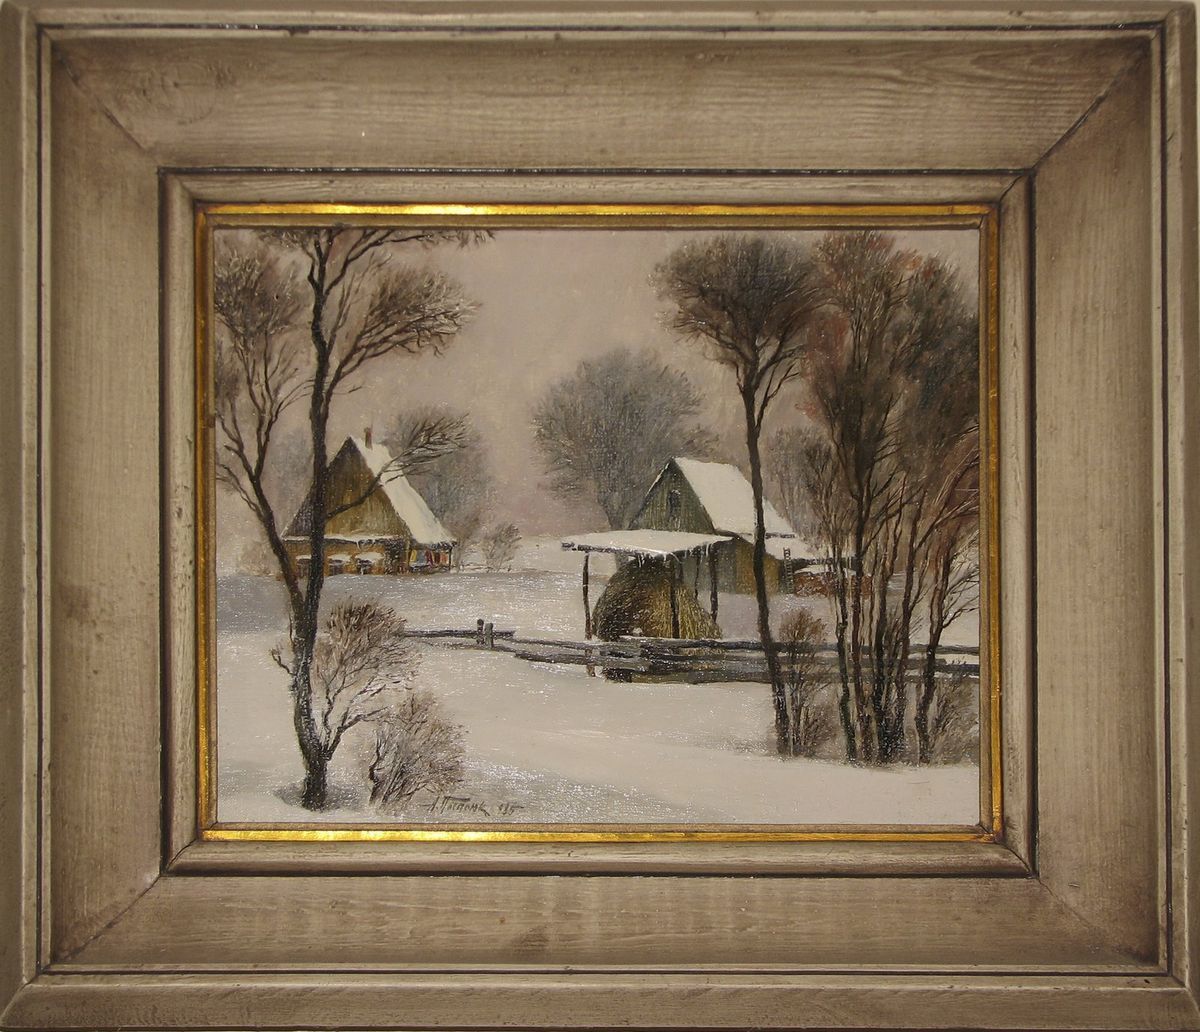   Oil Painting Winter in Carpathy Mountains by Anatoly Postoyuk, 1985